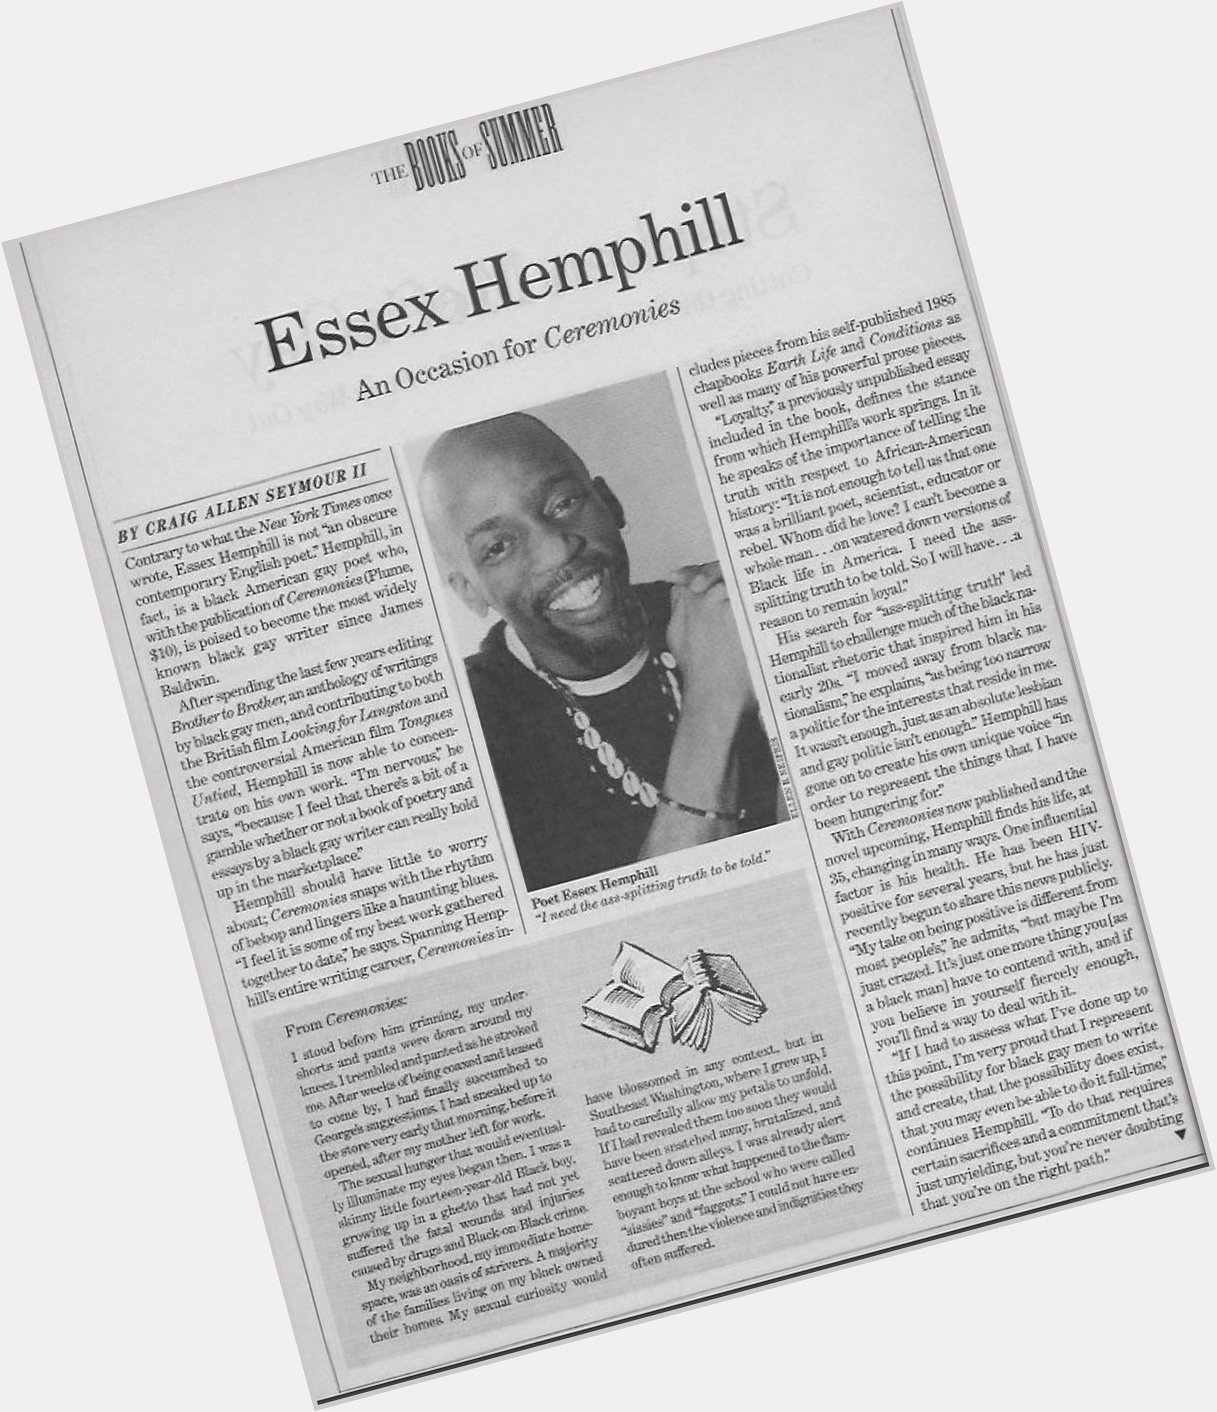 Happy Birthday, Essex Hemphill. Here s an article I wrote about my friend/mentor in 92. 